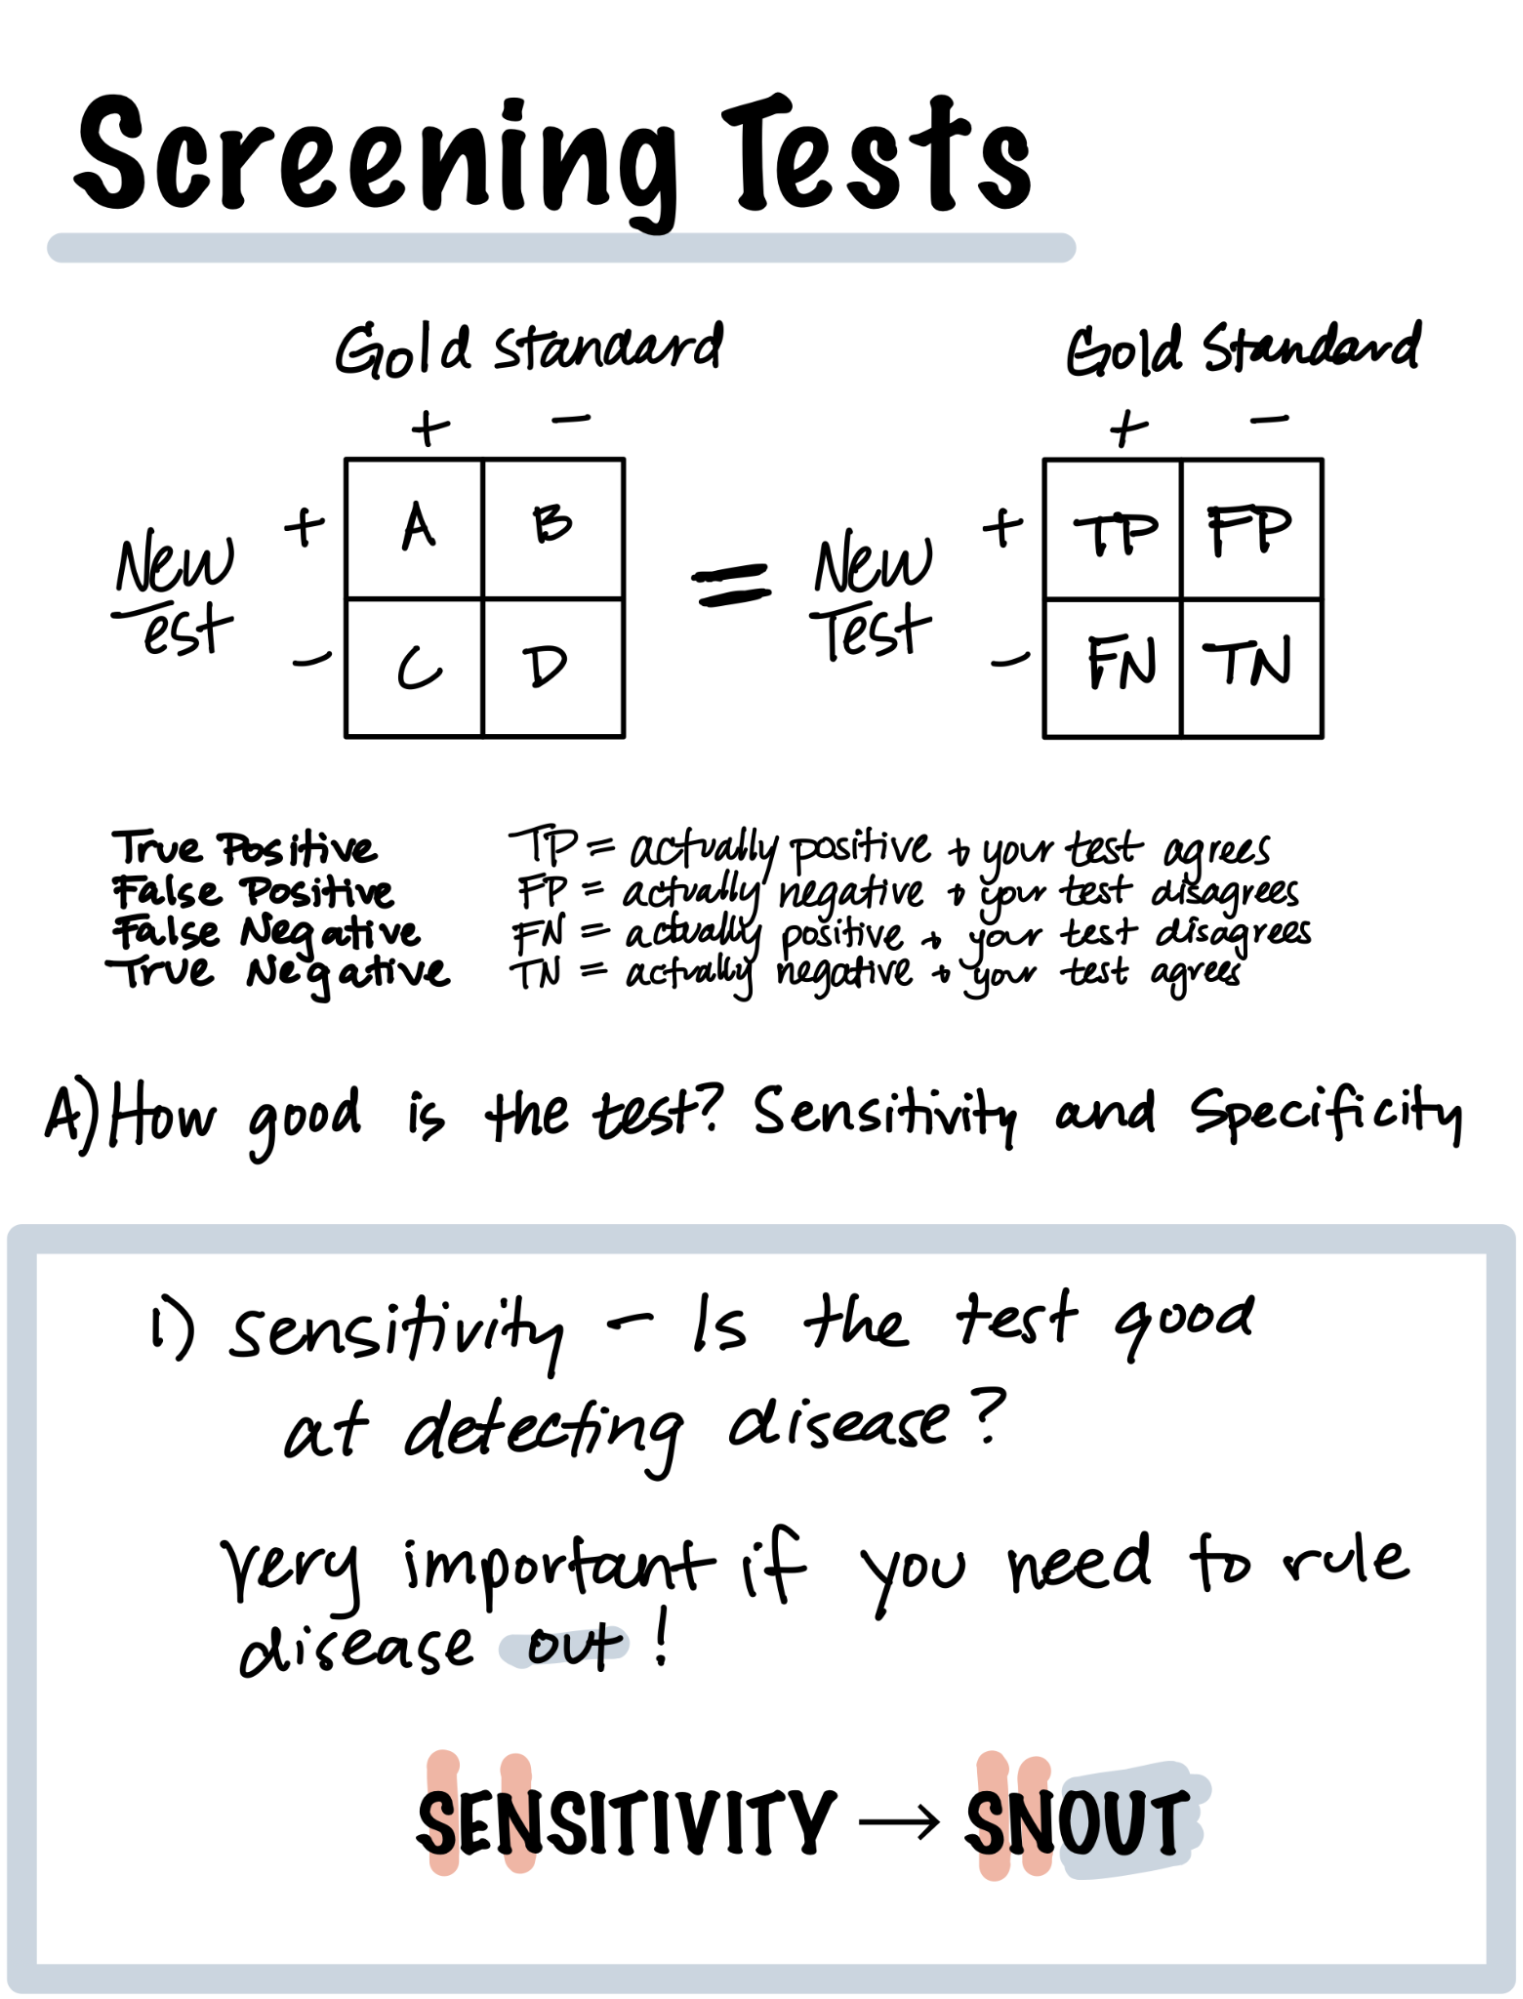 Screening Tests. Two-by two table. New Test on y-axis, Gold standard on x-axis. Top left cell: both new test and gold standard are positive, A or True Positive (TP). Top right cell: positive new test with negative gold standard is B, or False Positive (FP). Bottom left cell: positive gold standard with negative new test is C, or False Negative (FN). Bottom right cell: both new test and gold standard are negative, D or True Negative (TN). True positive (TP) equals actually positive and your test agrees. False positive (FP) equals actually negative and your test disagrees. False negative (FN) is actually positive and your test disagrees. True negative (TN) is actually negative and your test agrees. How good is the test? Sensitivity and Specificity. 1. Sensitivity: Is the test good at detecting disease? Very important if you need to rule disease out! Memory tool: in the word Sensitivity, S and N are highlighted, next to the word Snout. S and N are highlighted in red and 'out' is highlighted in blue.